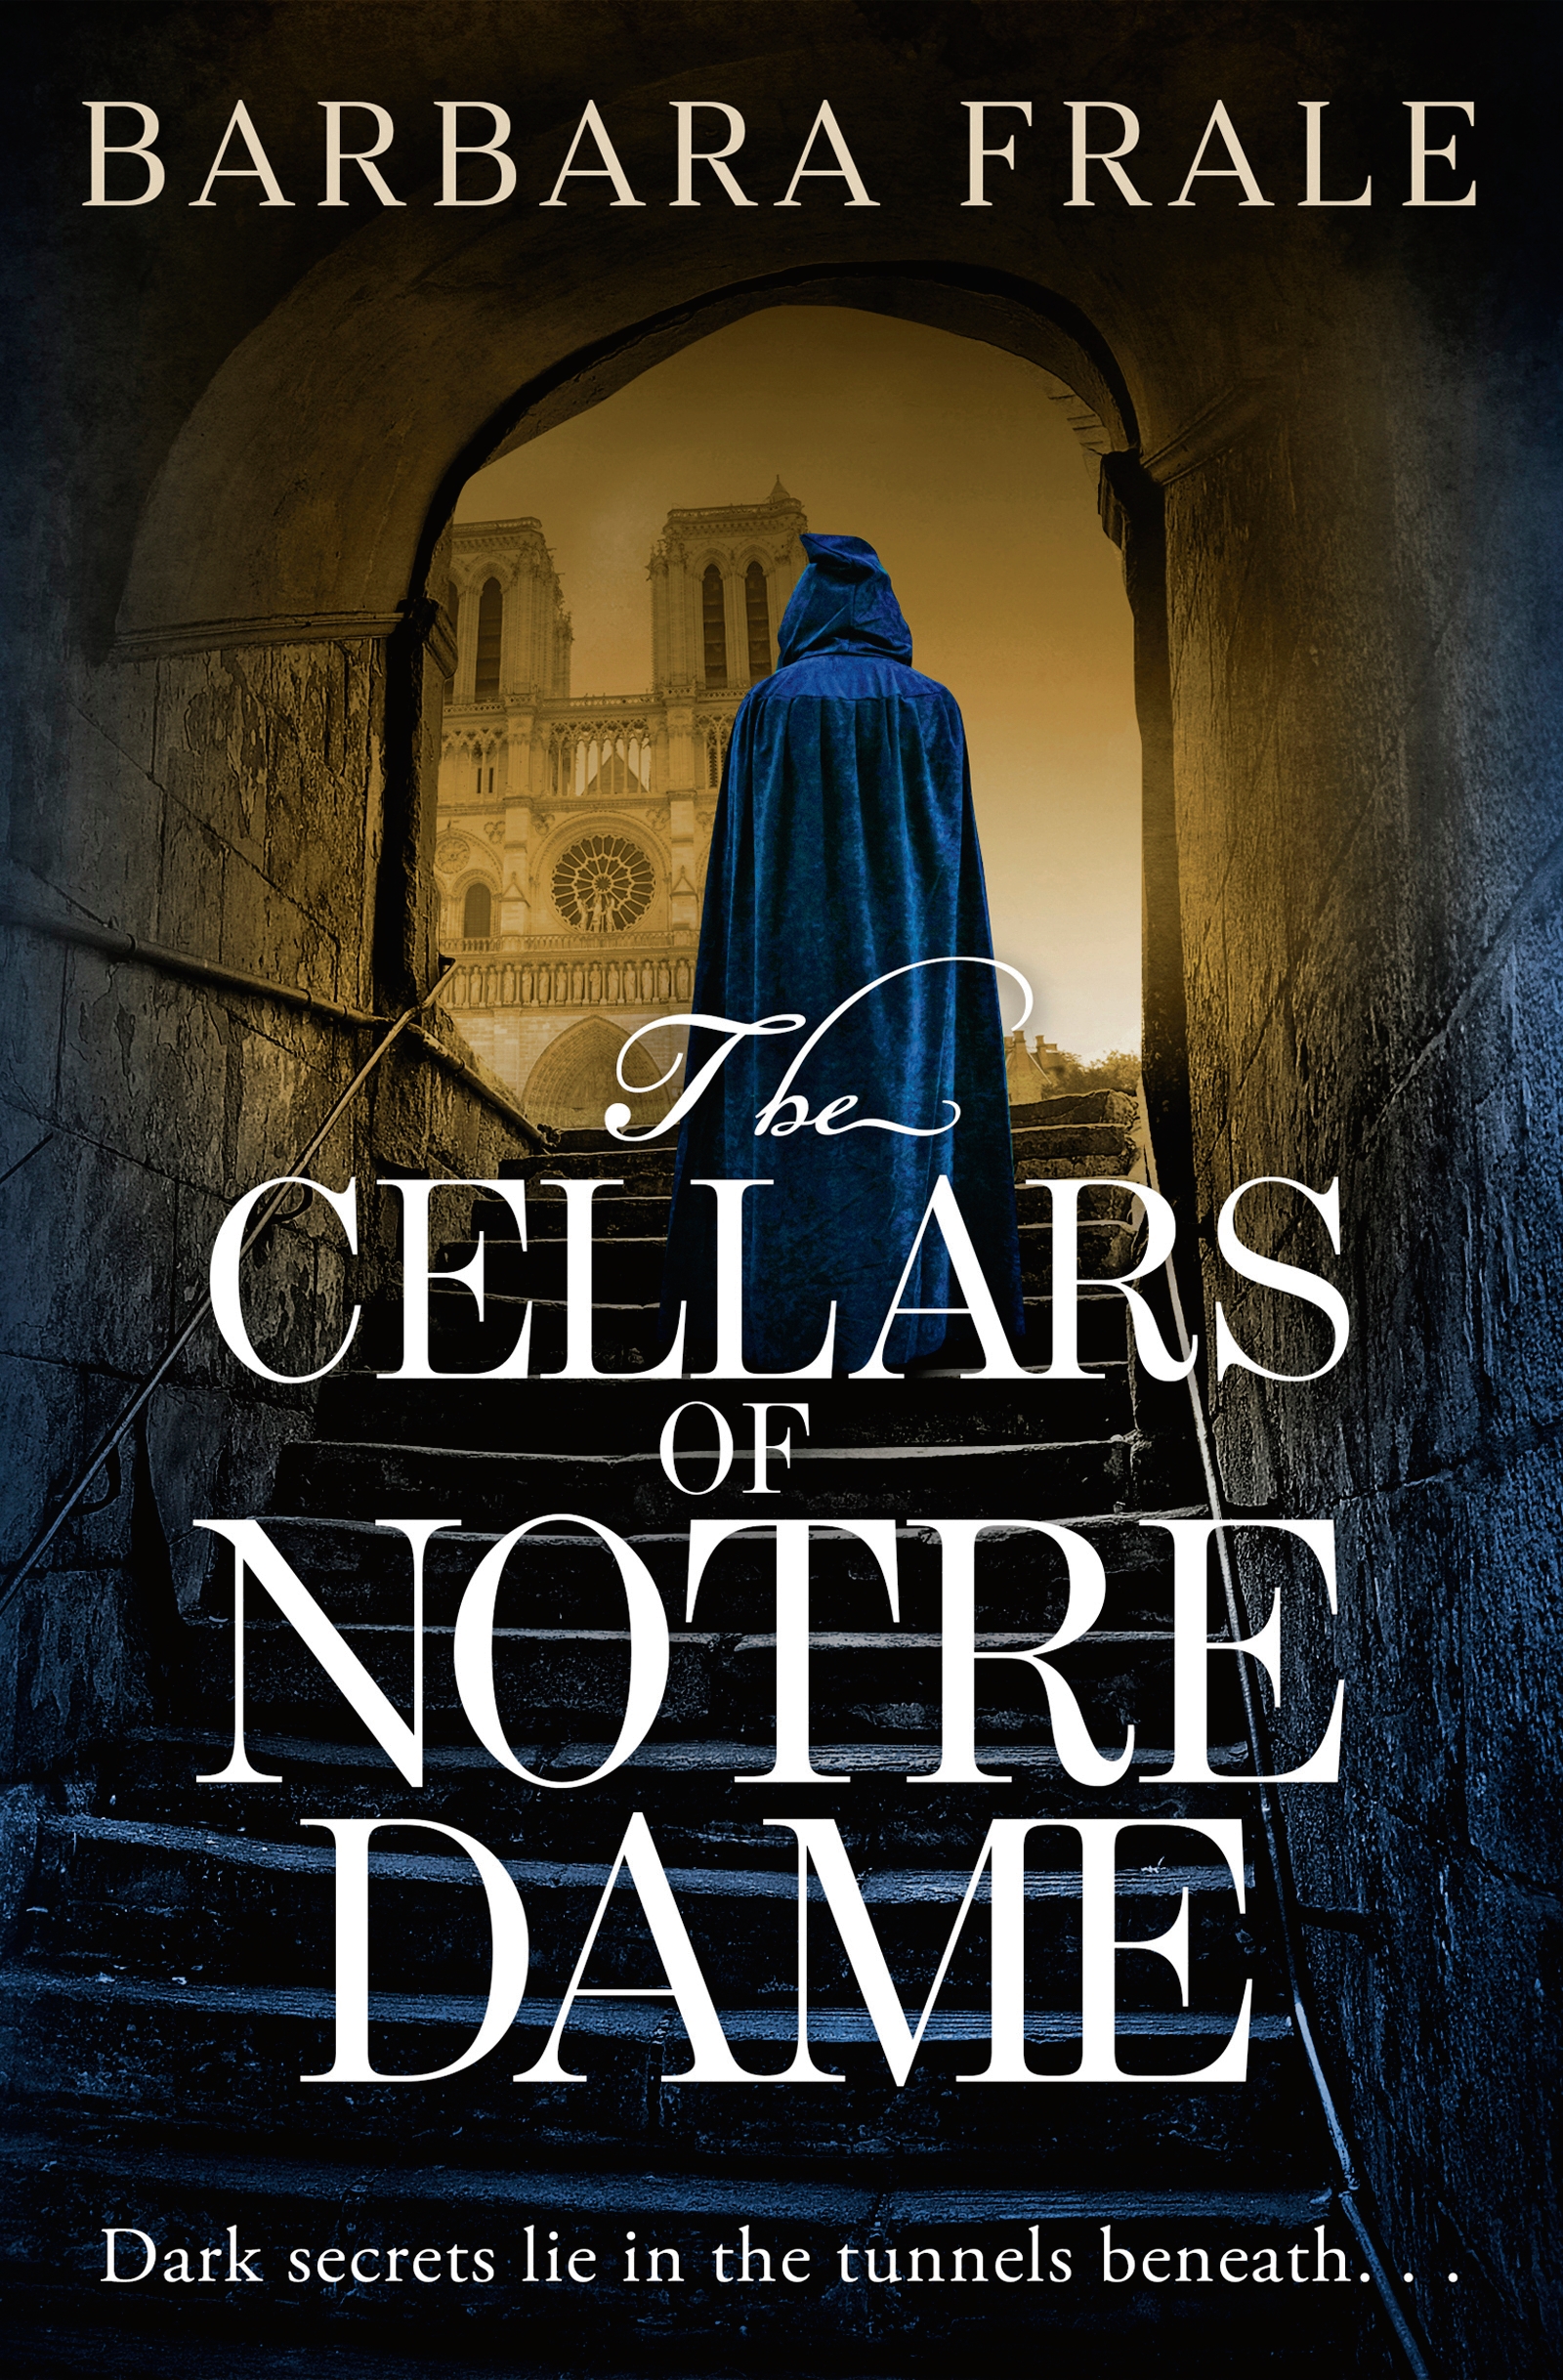 The Cellars of Notre Dame - <5